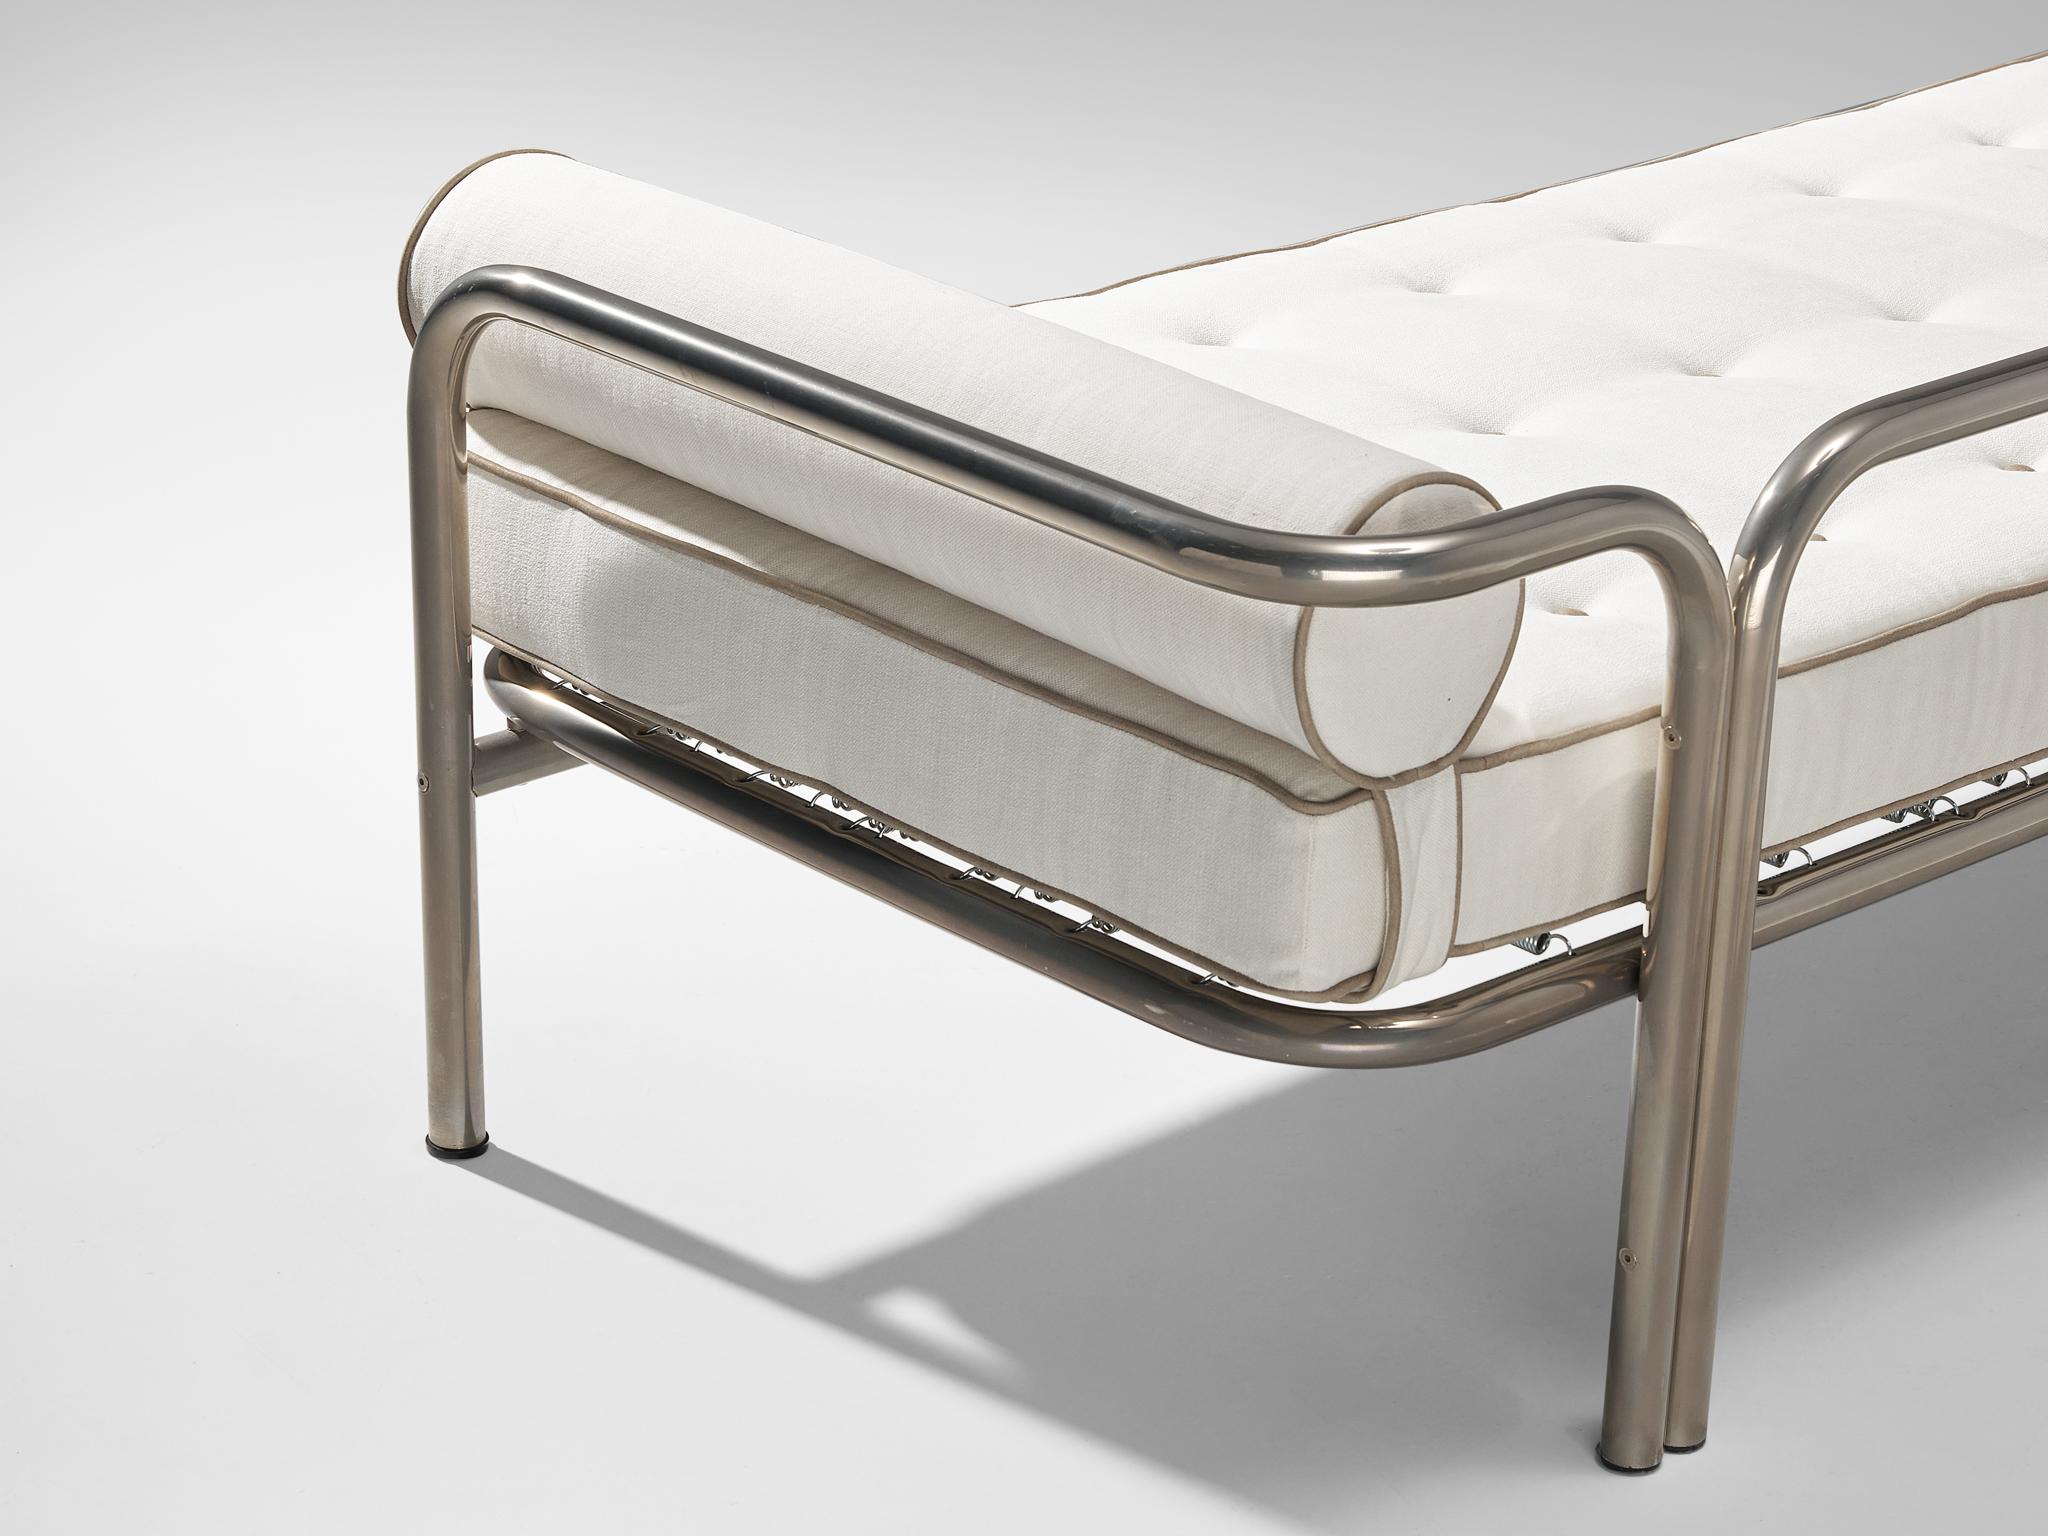 Gae Aulenti for Poltronova 'Locus Solus' Daybed in Chrome-Plated Steel 1